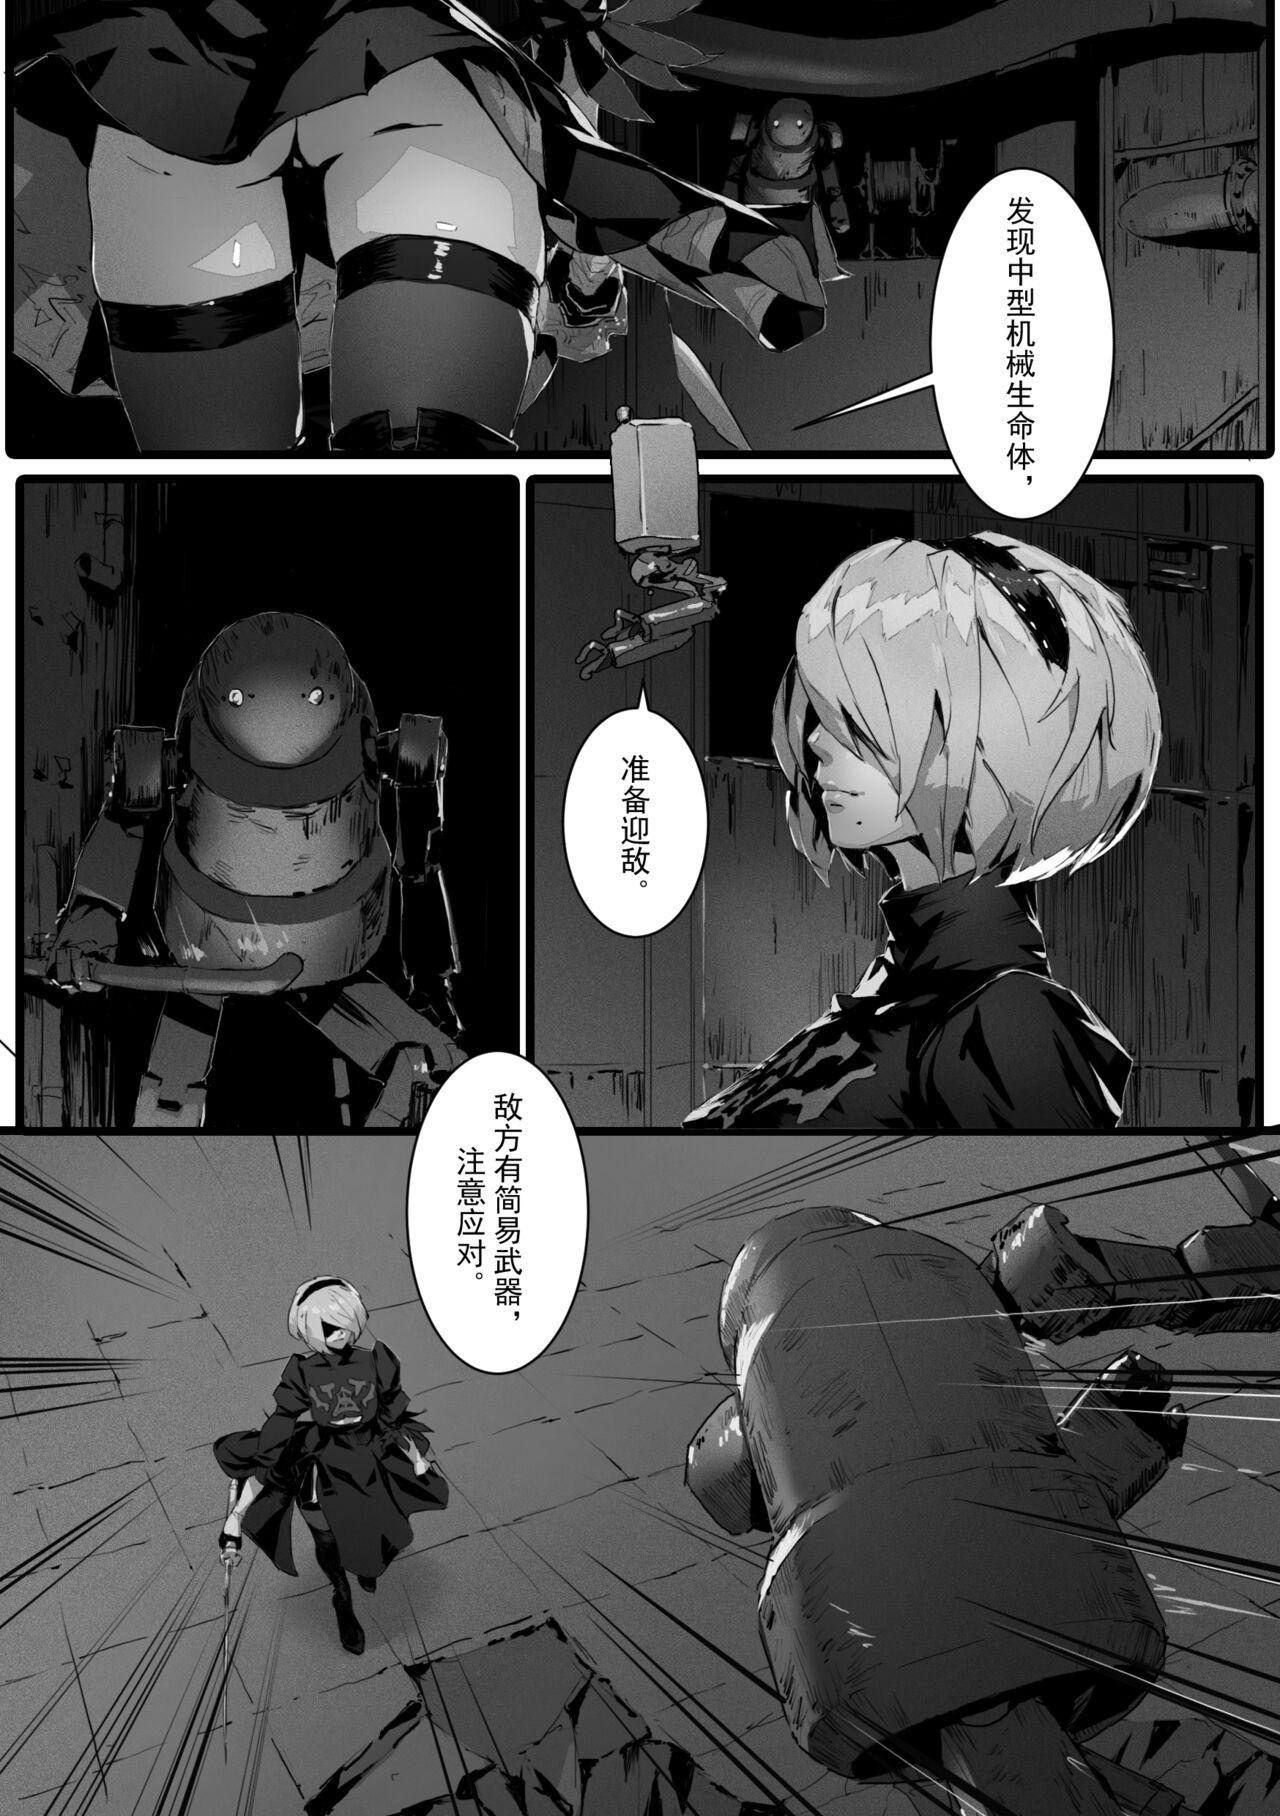  2B In Trouble Part 1-6 - Nier automata Real Amature Porn - Page 2